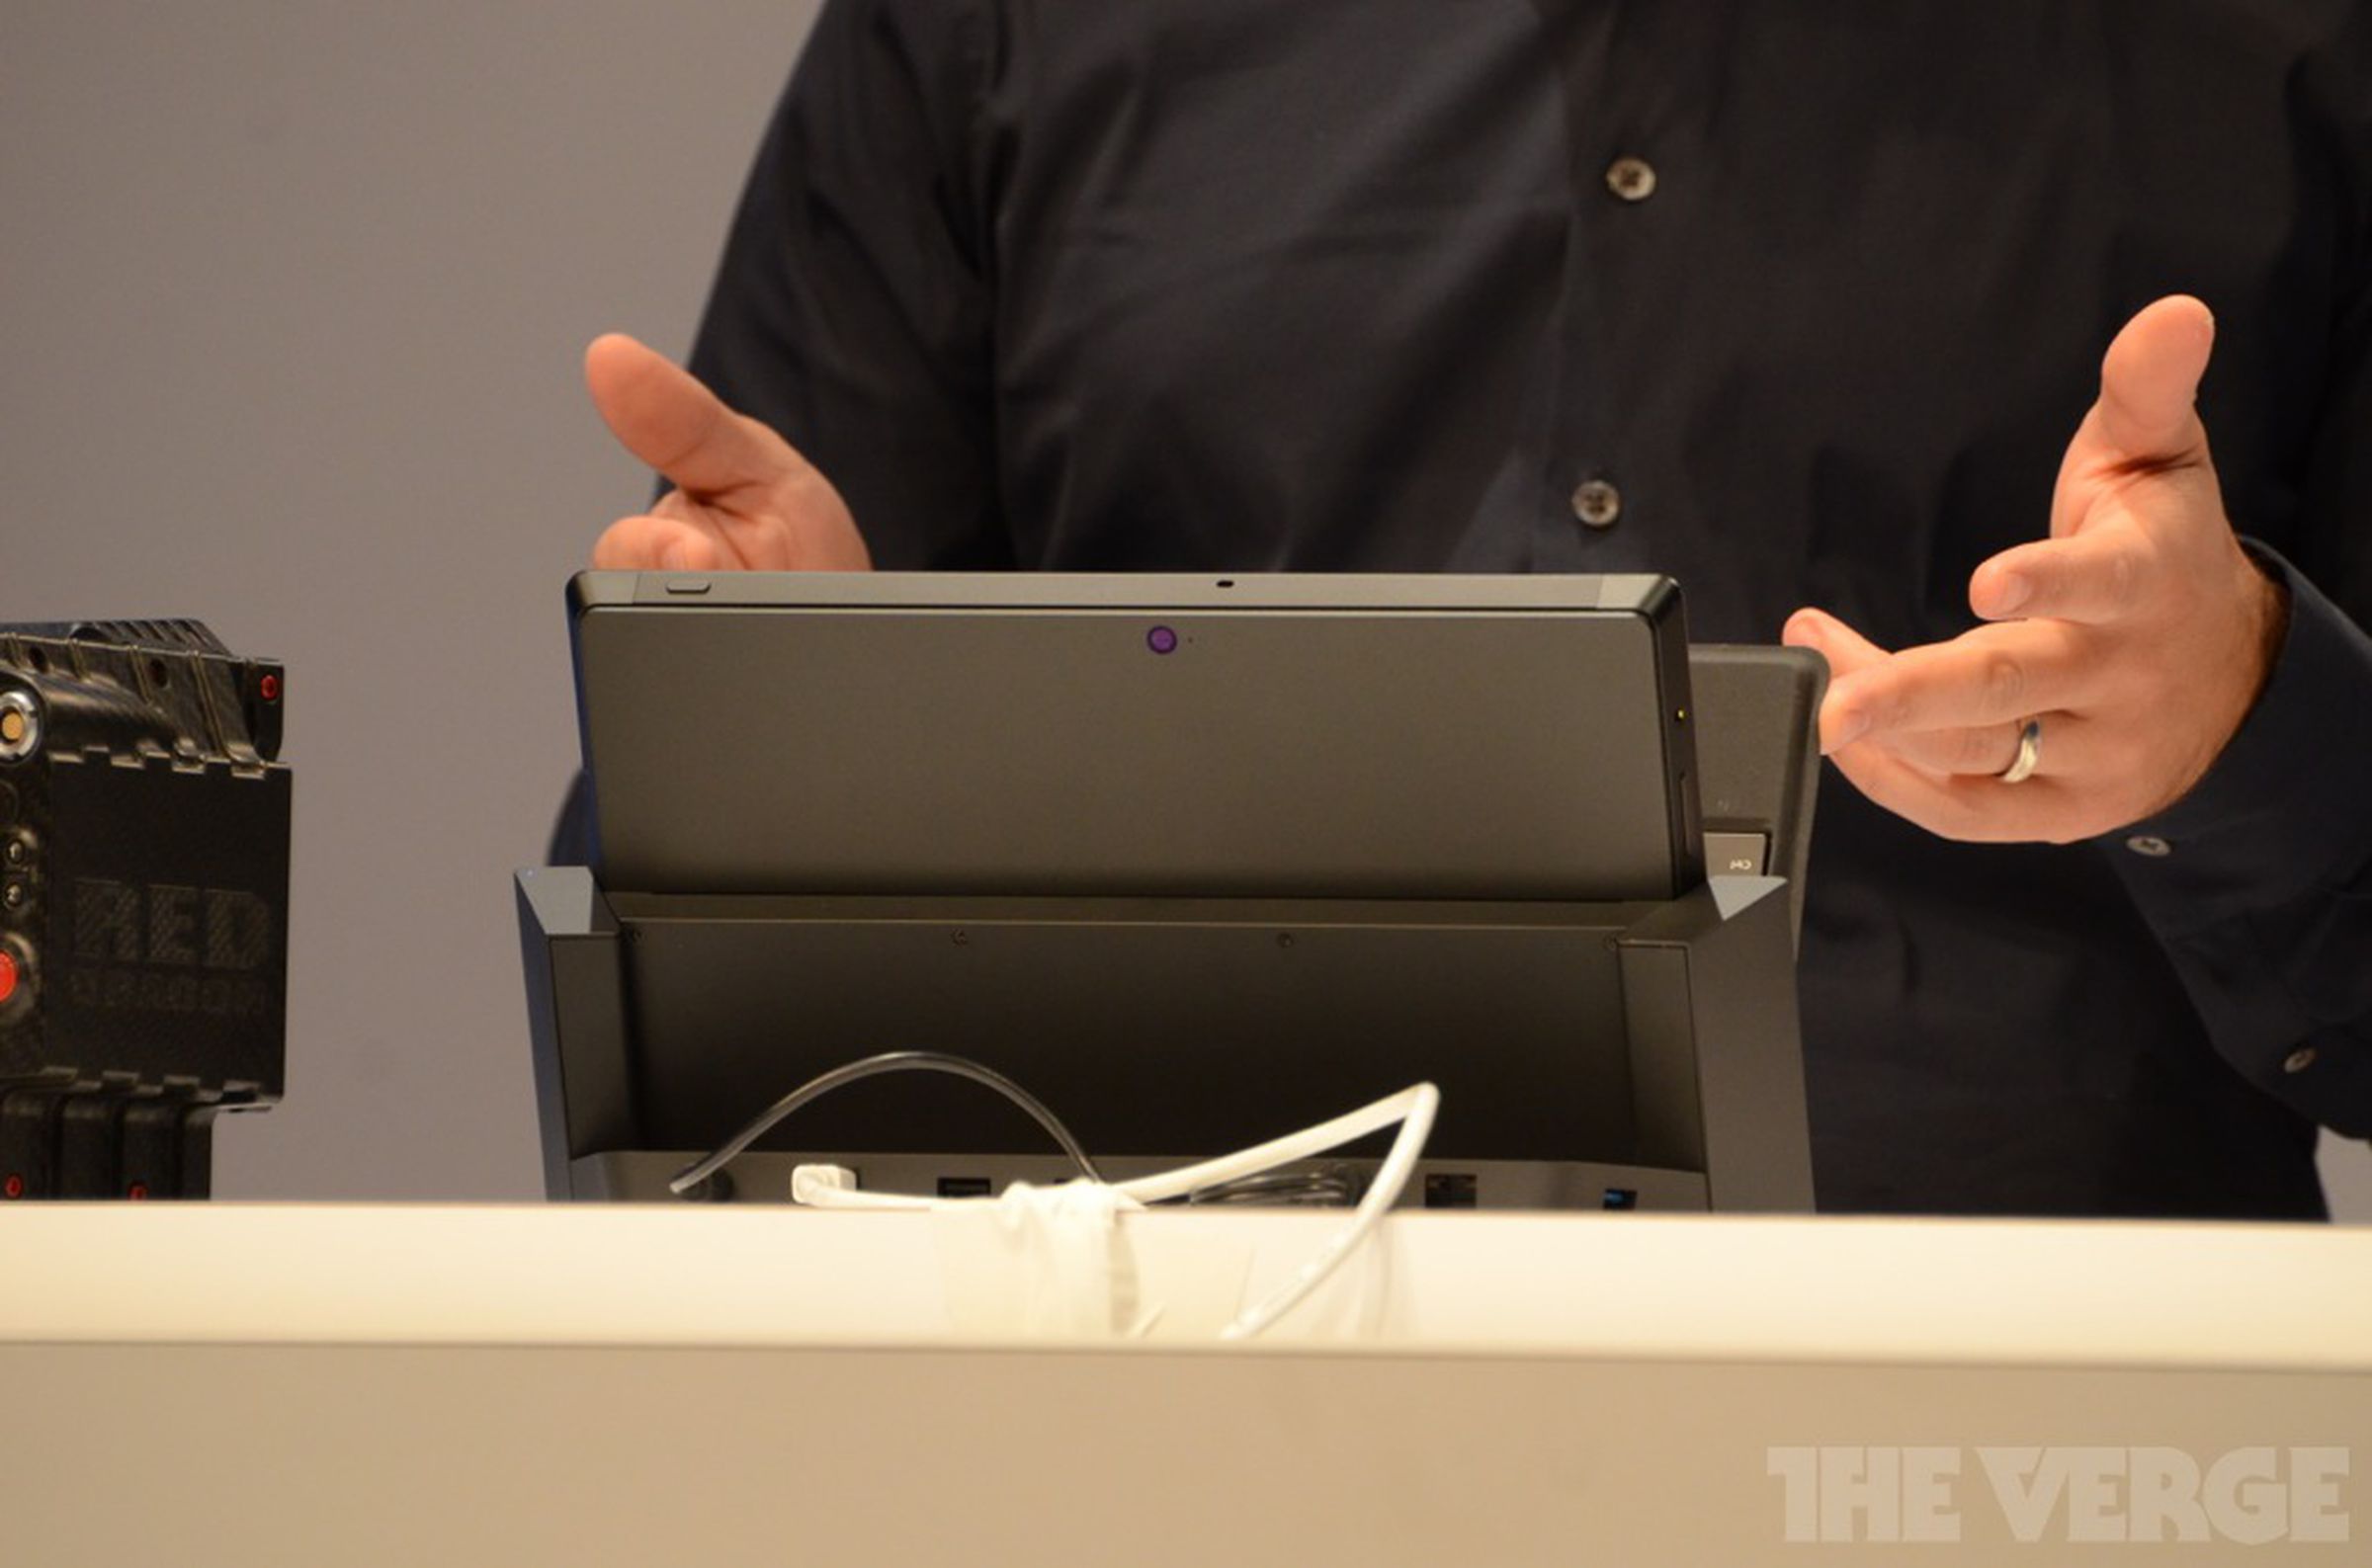 Surface Pro 2 Power Cover and Docking Station announce photos